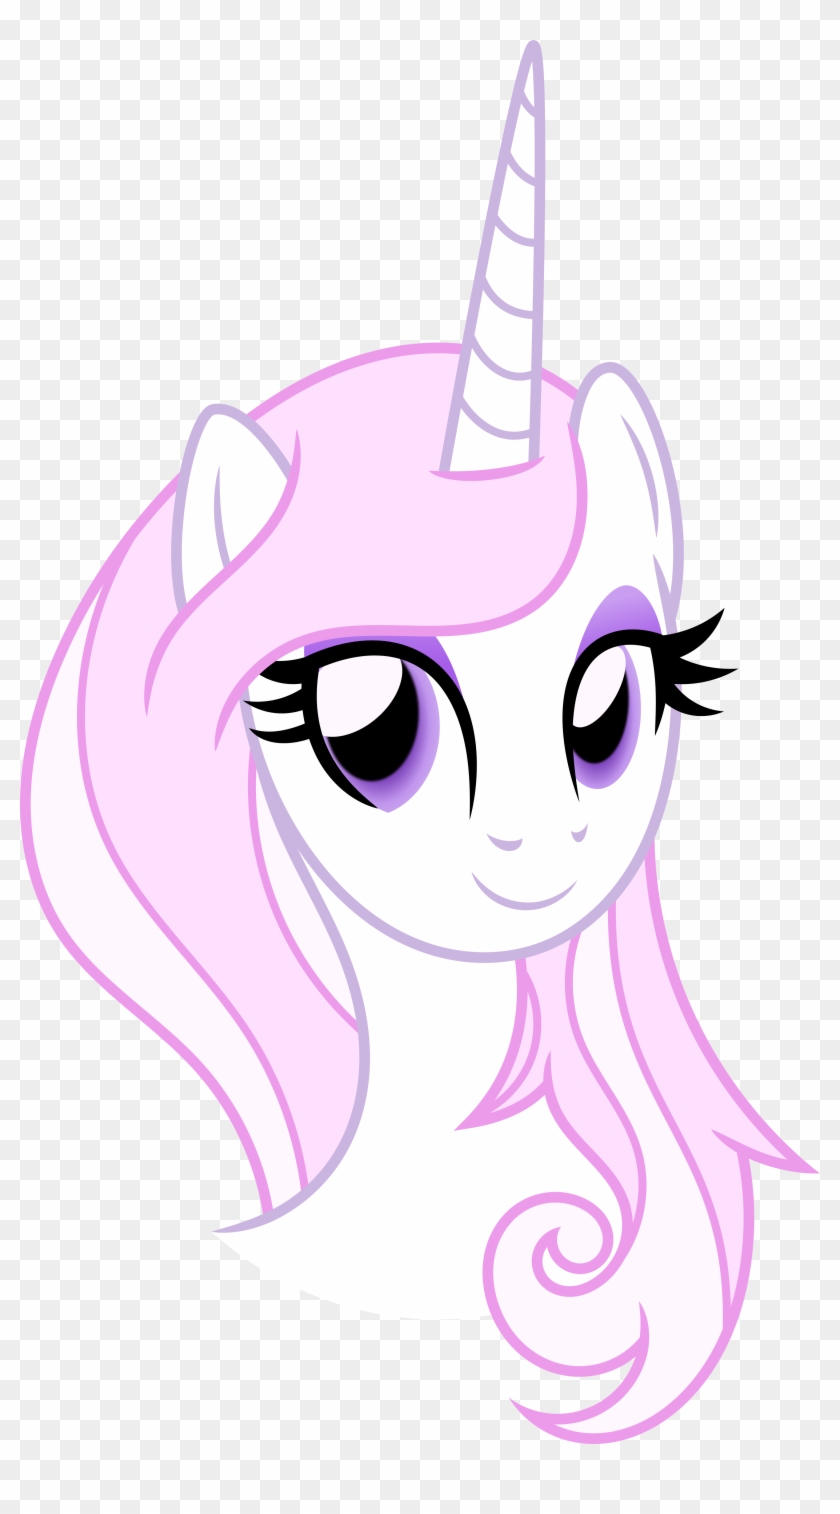 My Little Pony Clipart Unicorn - White And Pink My Little Pony #325540